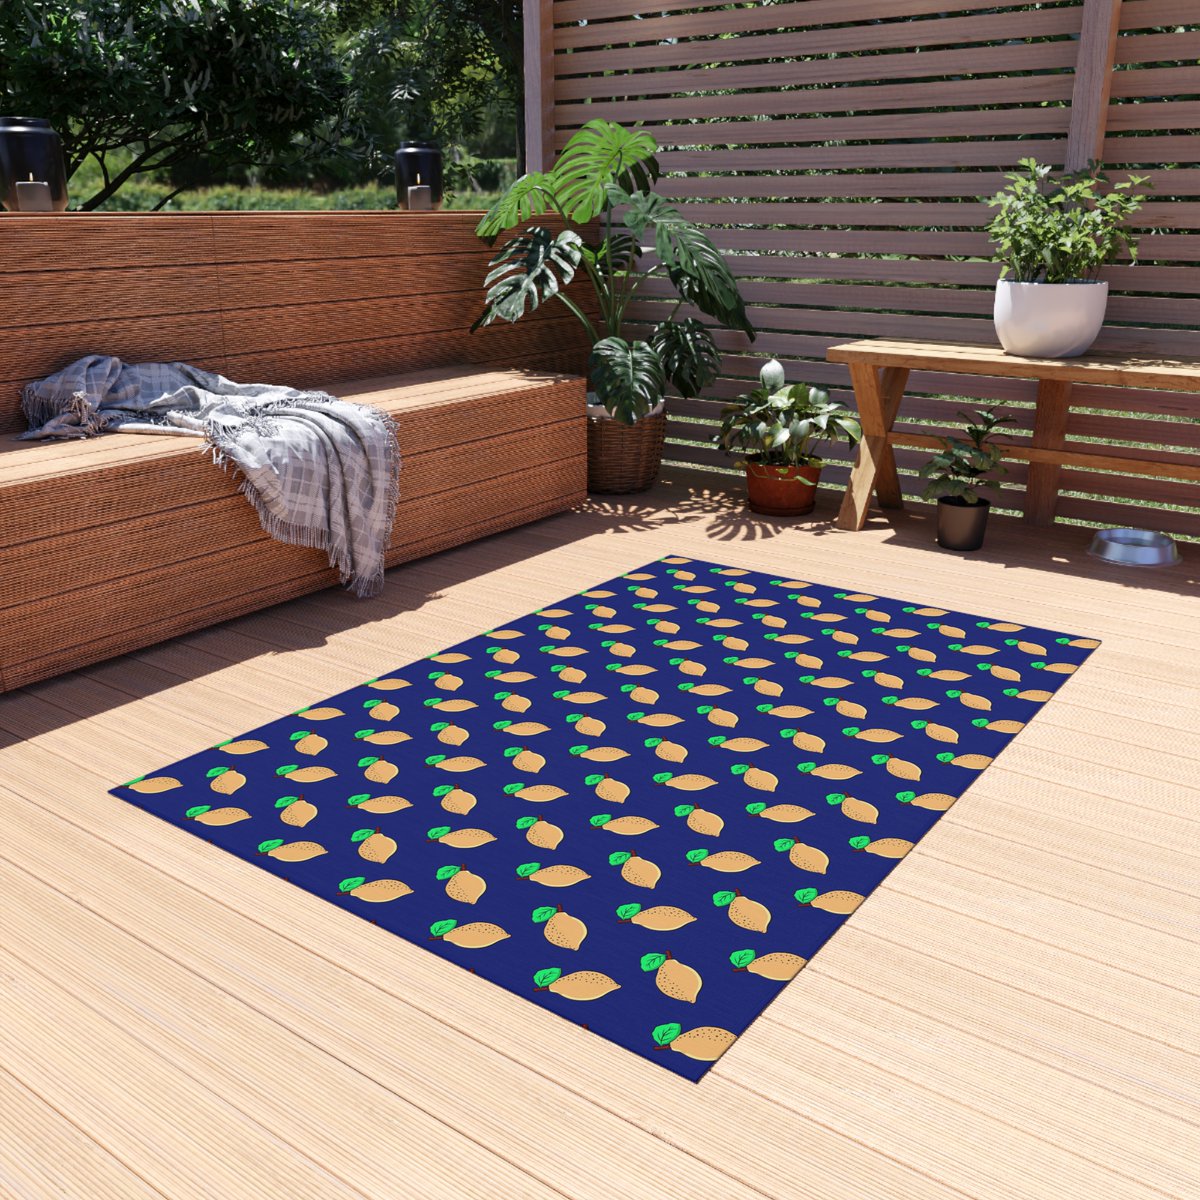 Yellow Lemon Pattern on Dark Blue Outdoor Rugs
#Rugby #RugbyCA #USA #outdoors #NYC